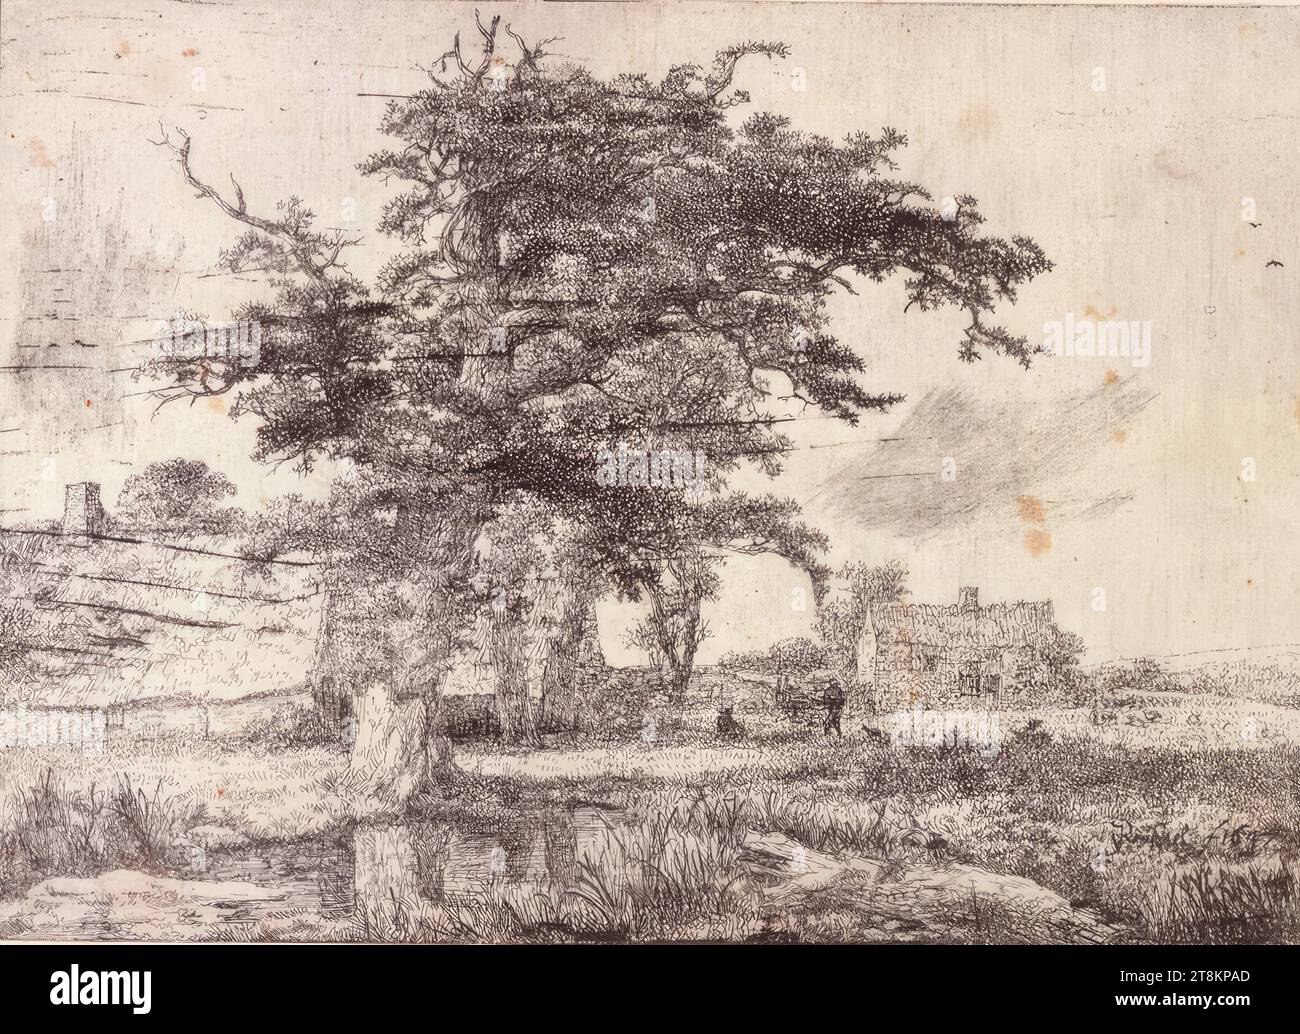 Landscape with oak trees, farmhouses and a body of water, Jacob van Ruisdael, Haarlem 1628/29 - 1682 Amsterdam, print, etching, sheet: 145 mm x 201 mm Stock Photo